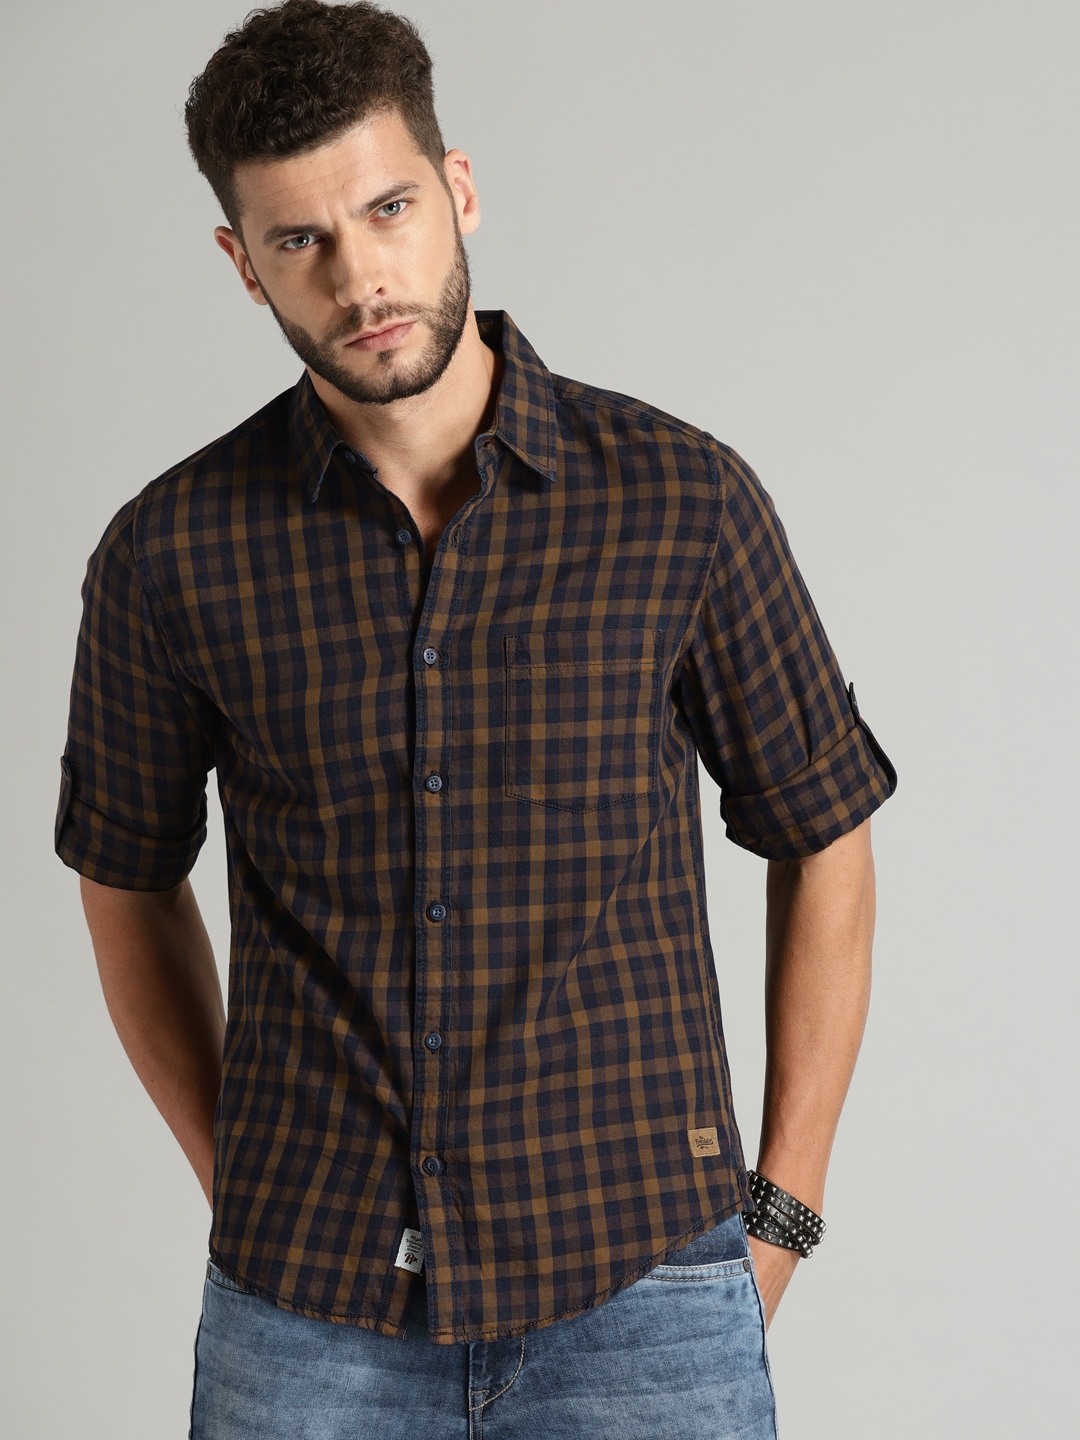 Buy Roadster Men Navy Blue & Brown Regular Fit Checked Casual Shirt ...